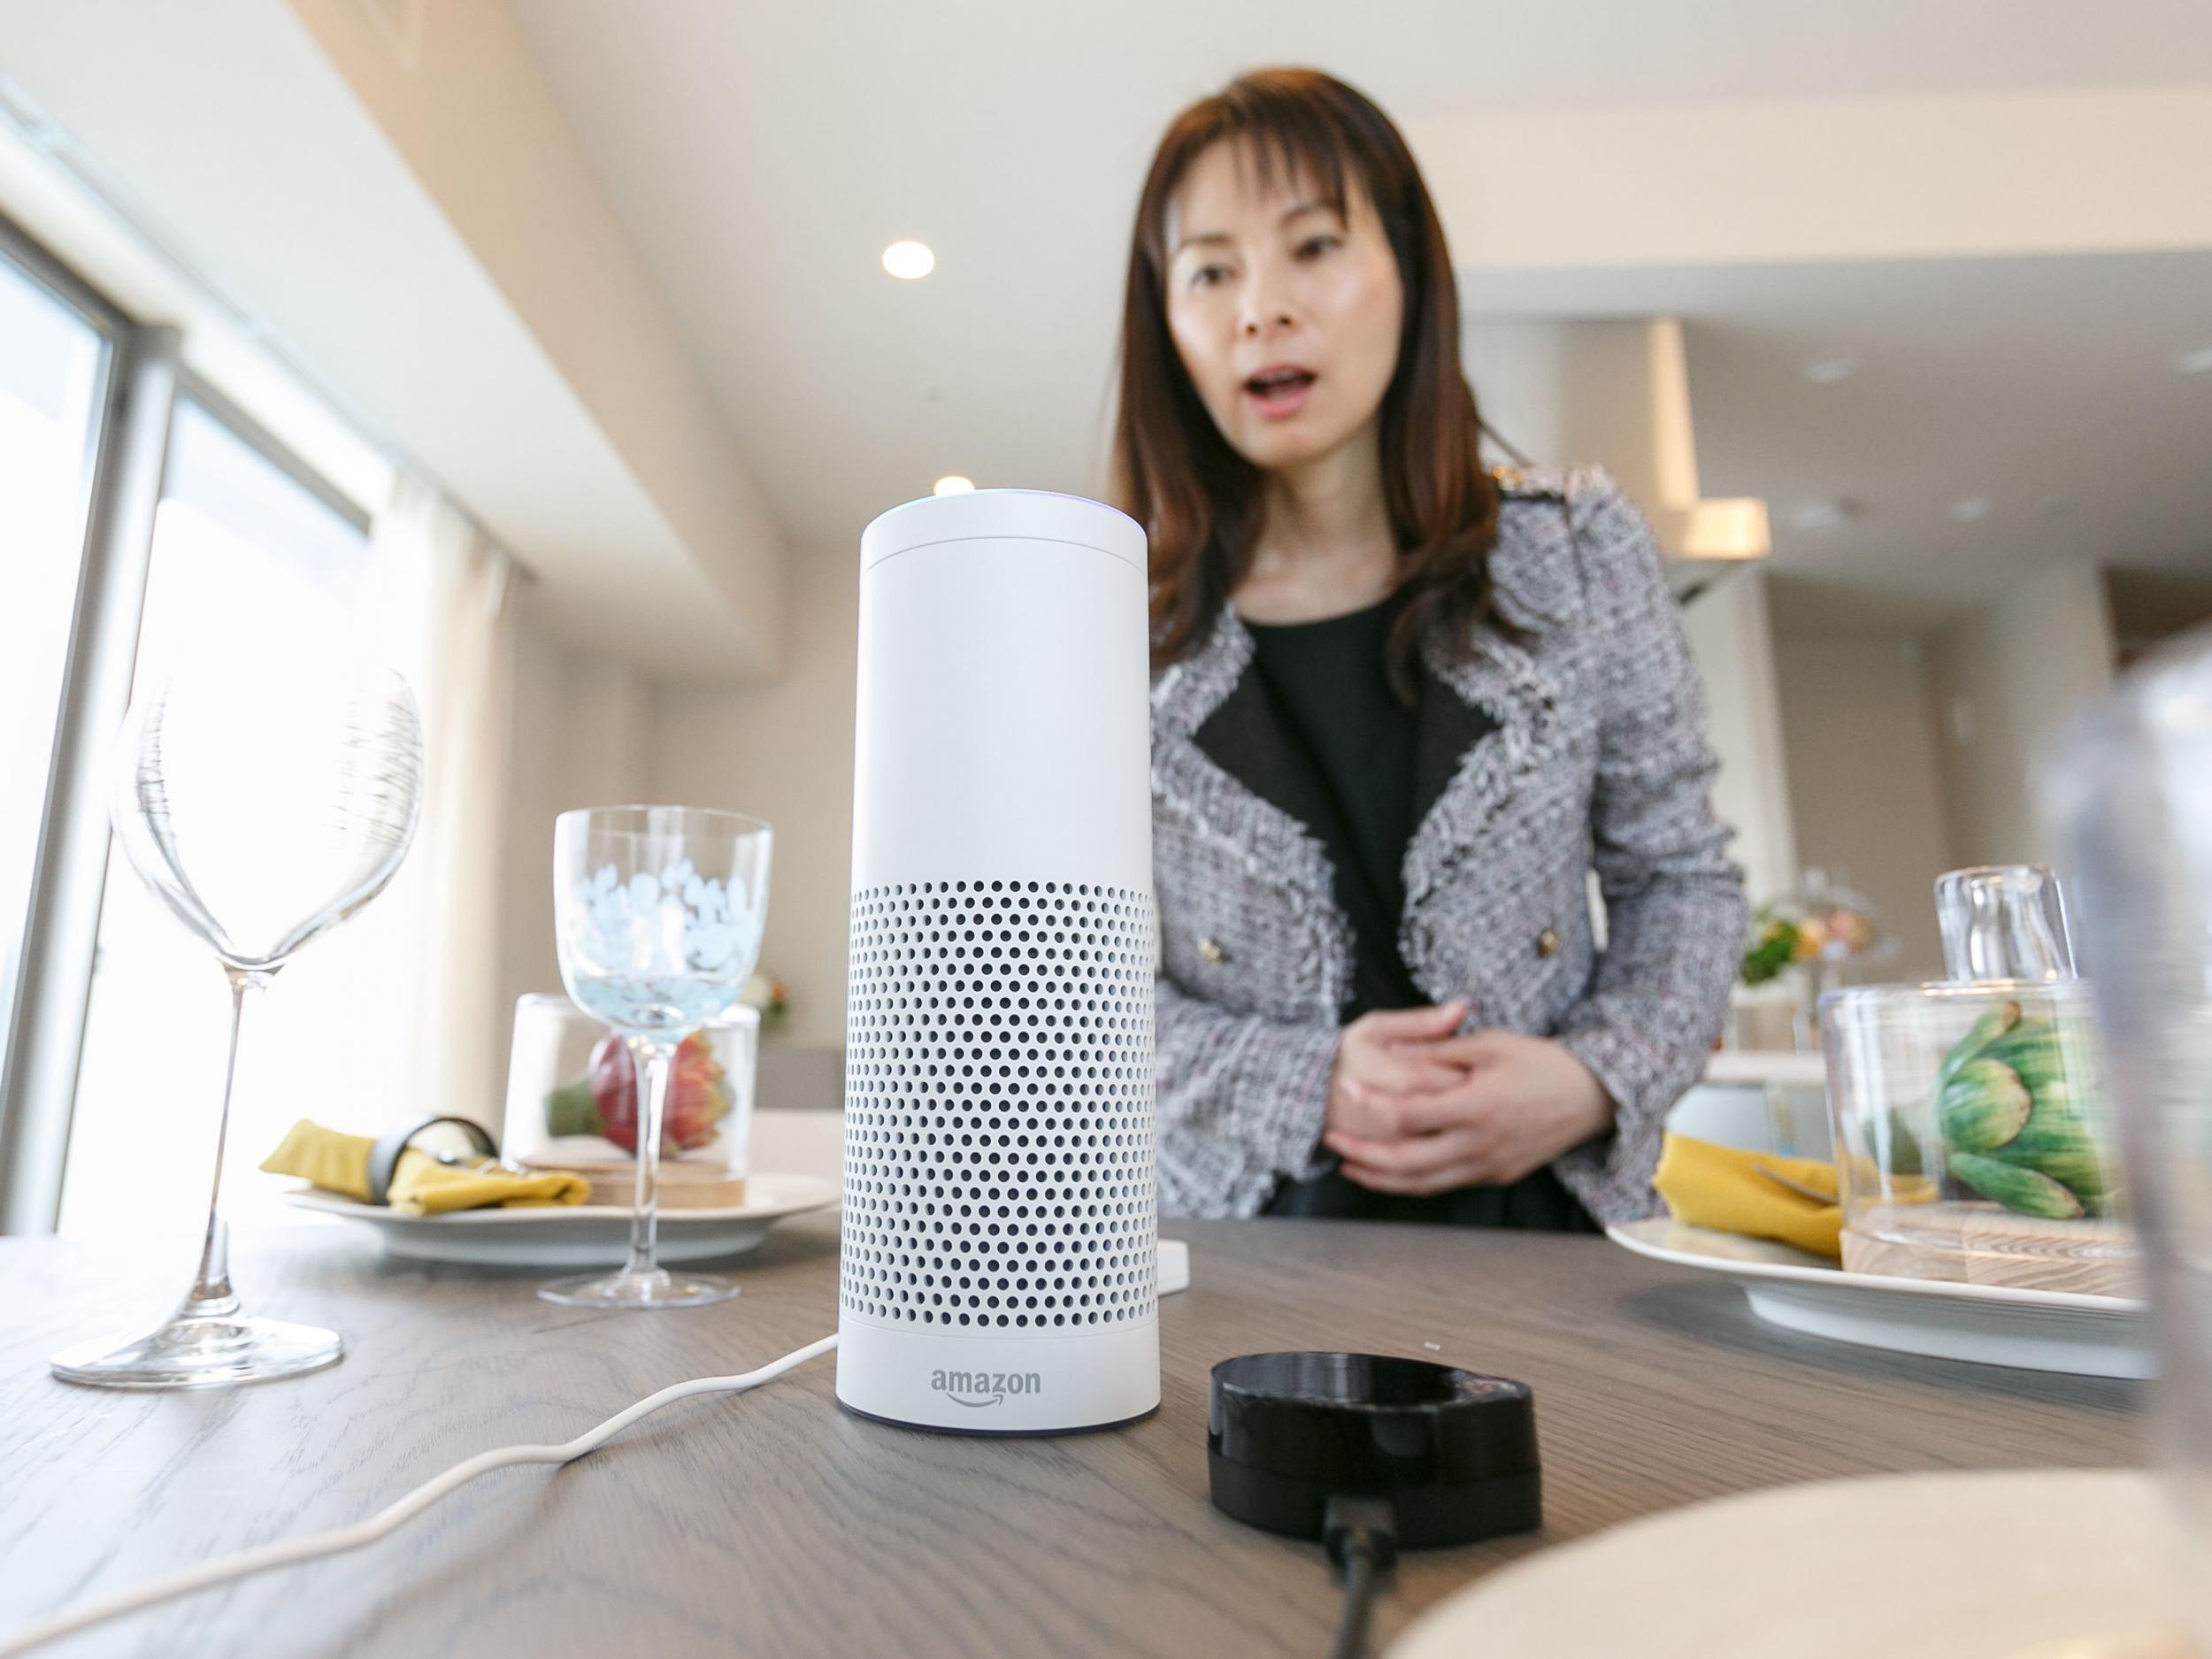 Despite the popularity of voice assistants such as Amazon Echo and Google Home, many still only use them for basic tasks